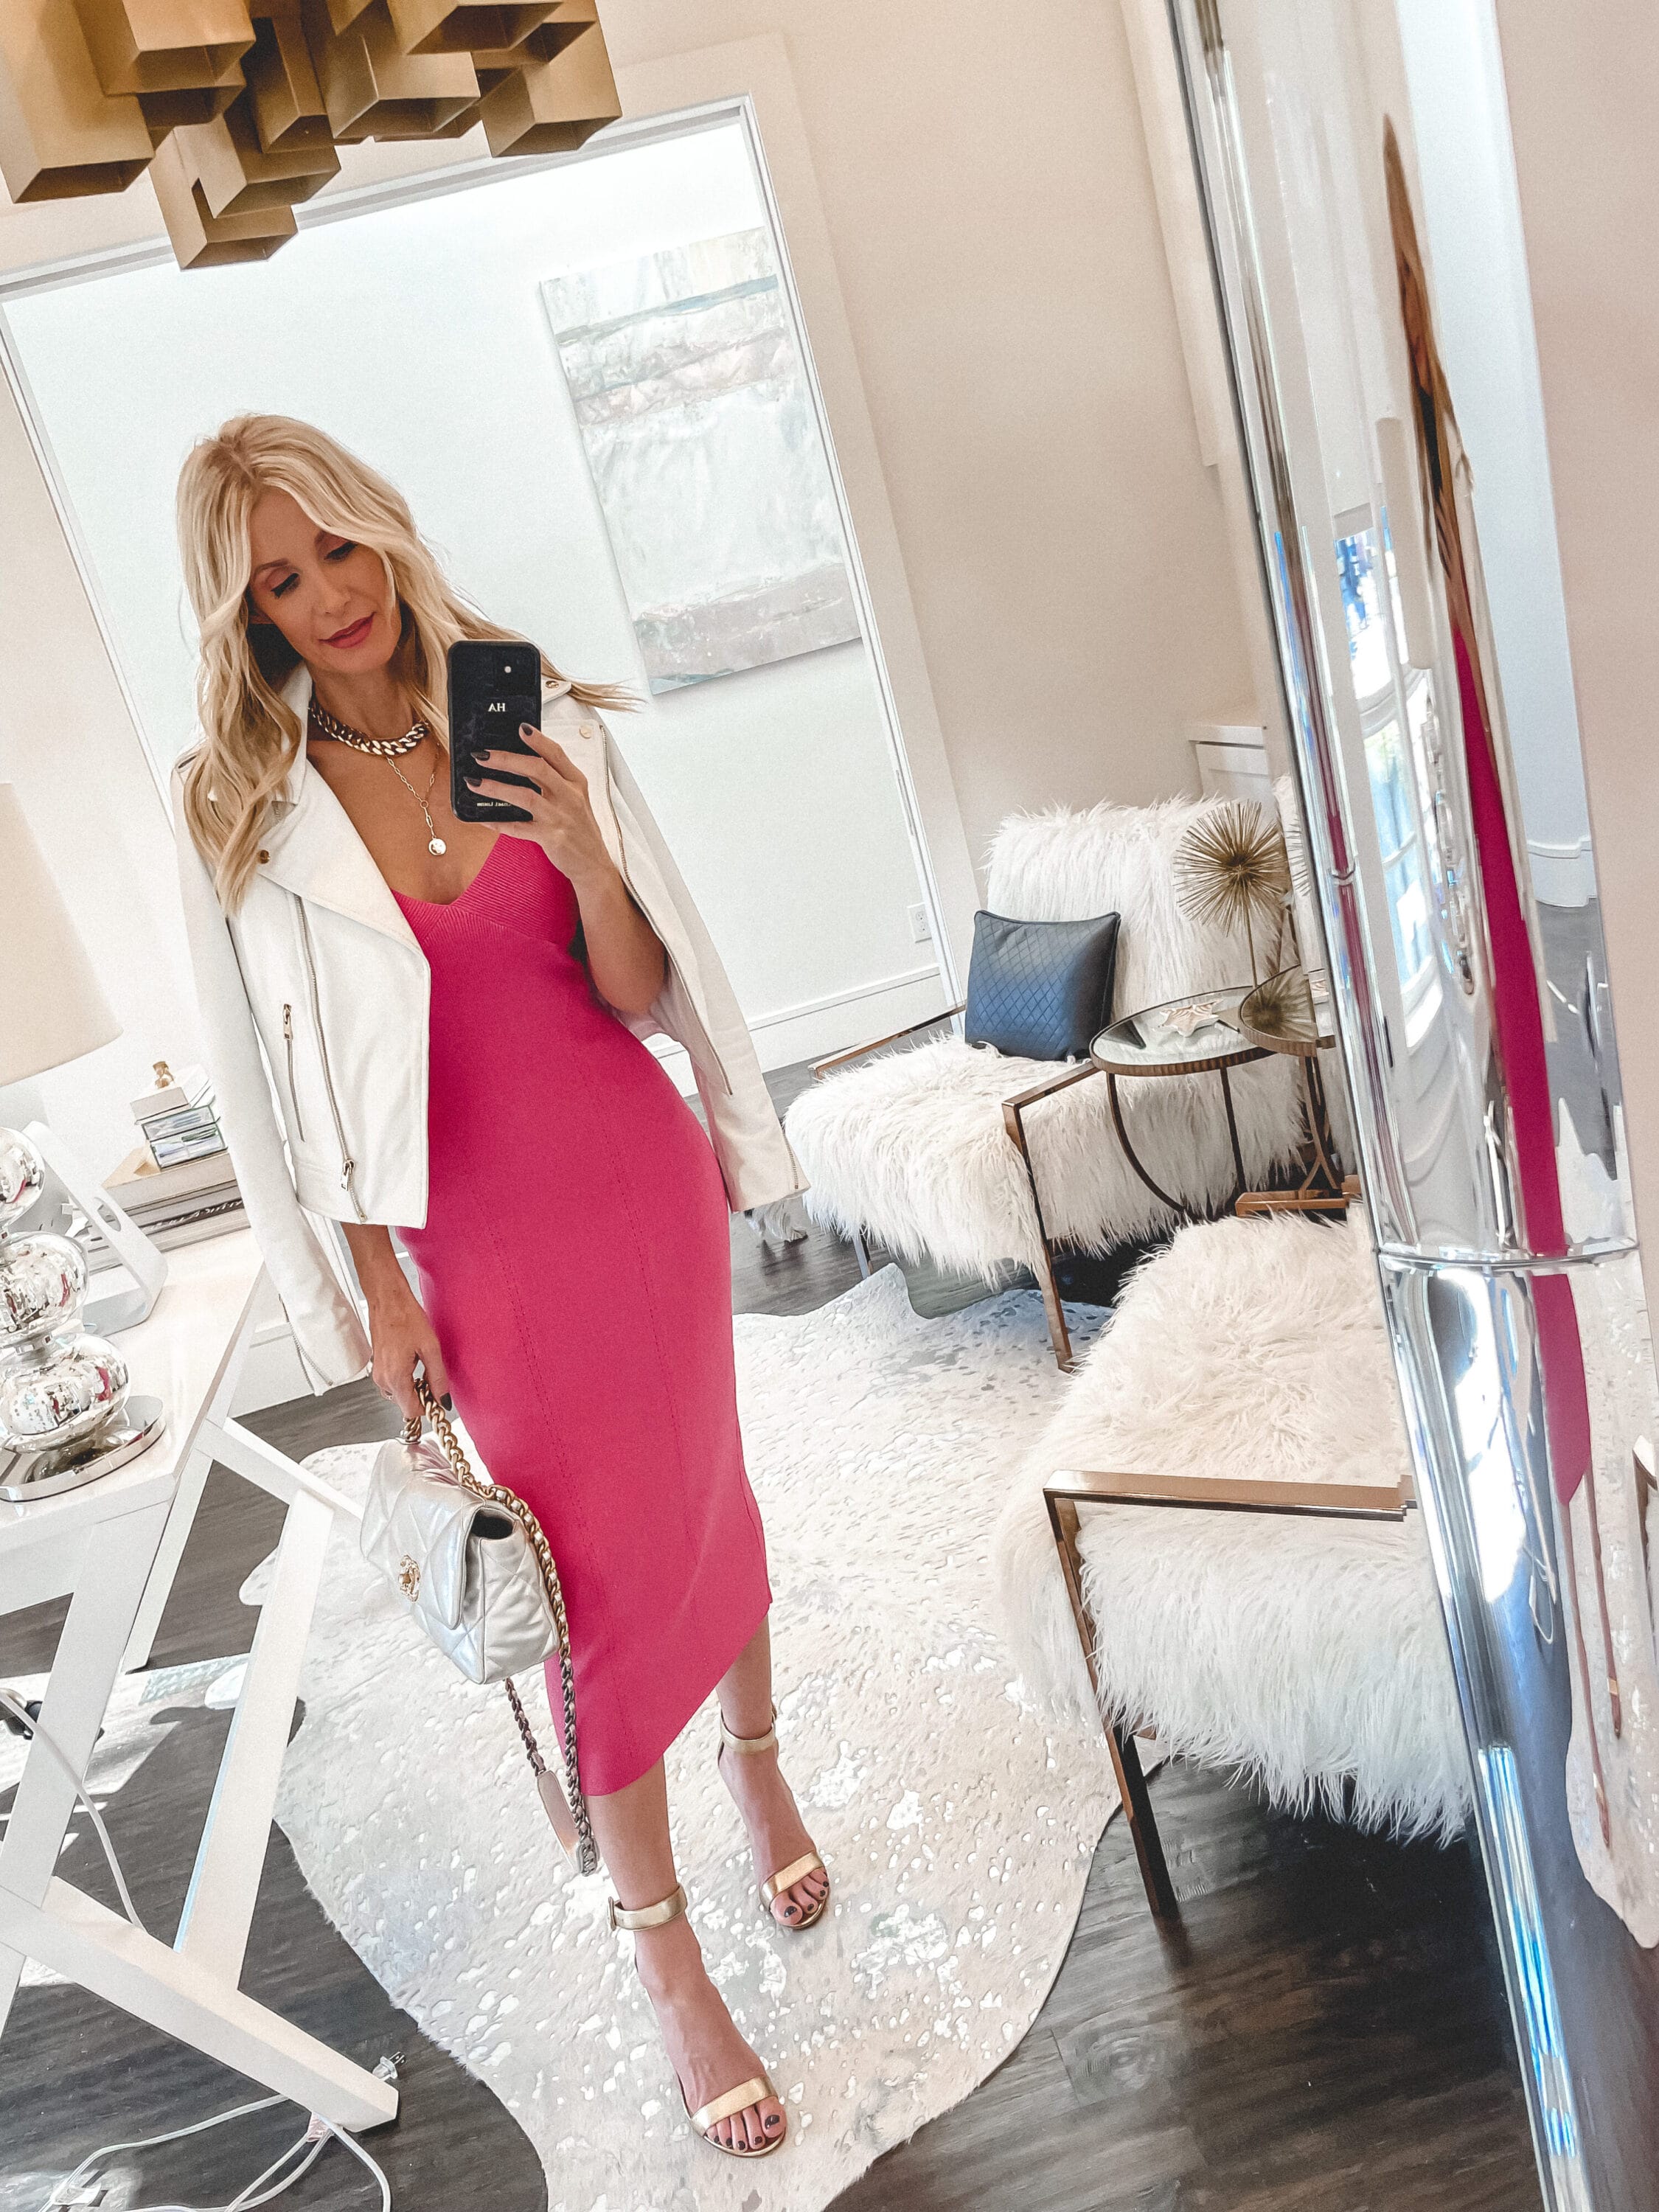 Dallas fashion blogger over 40 wearing chic date night look pink dress